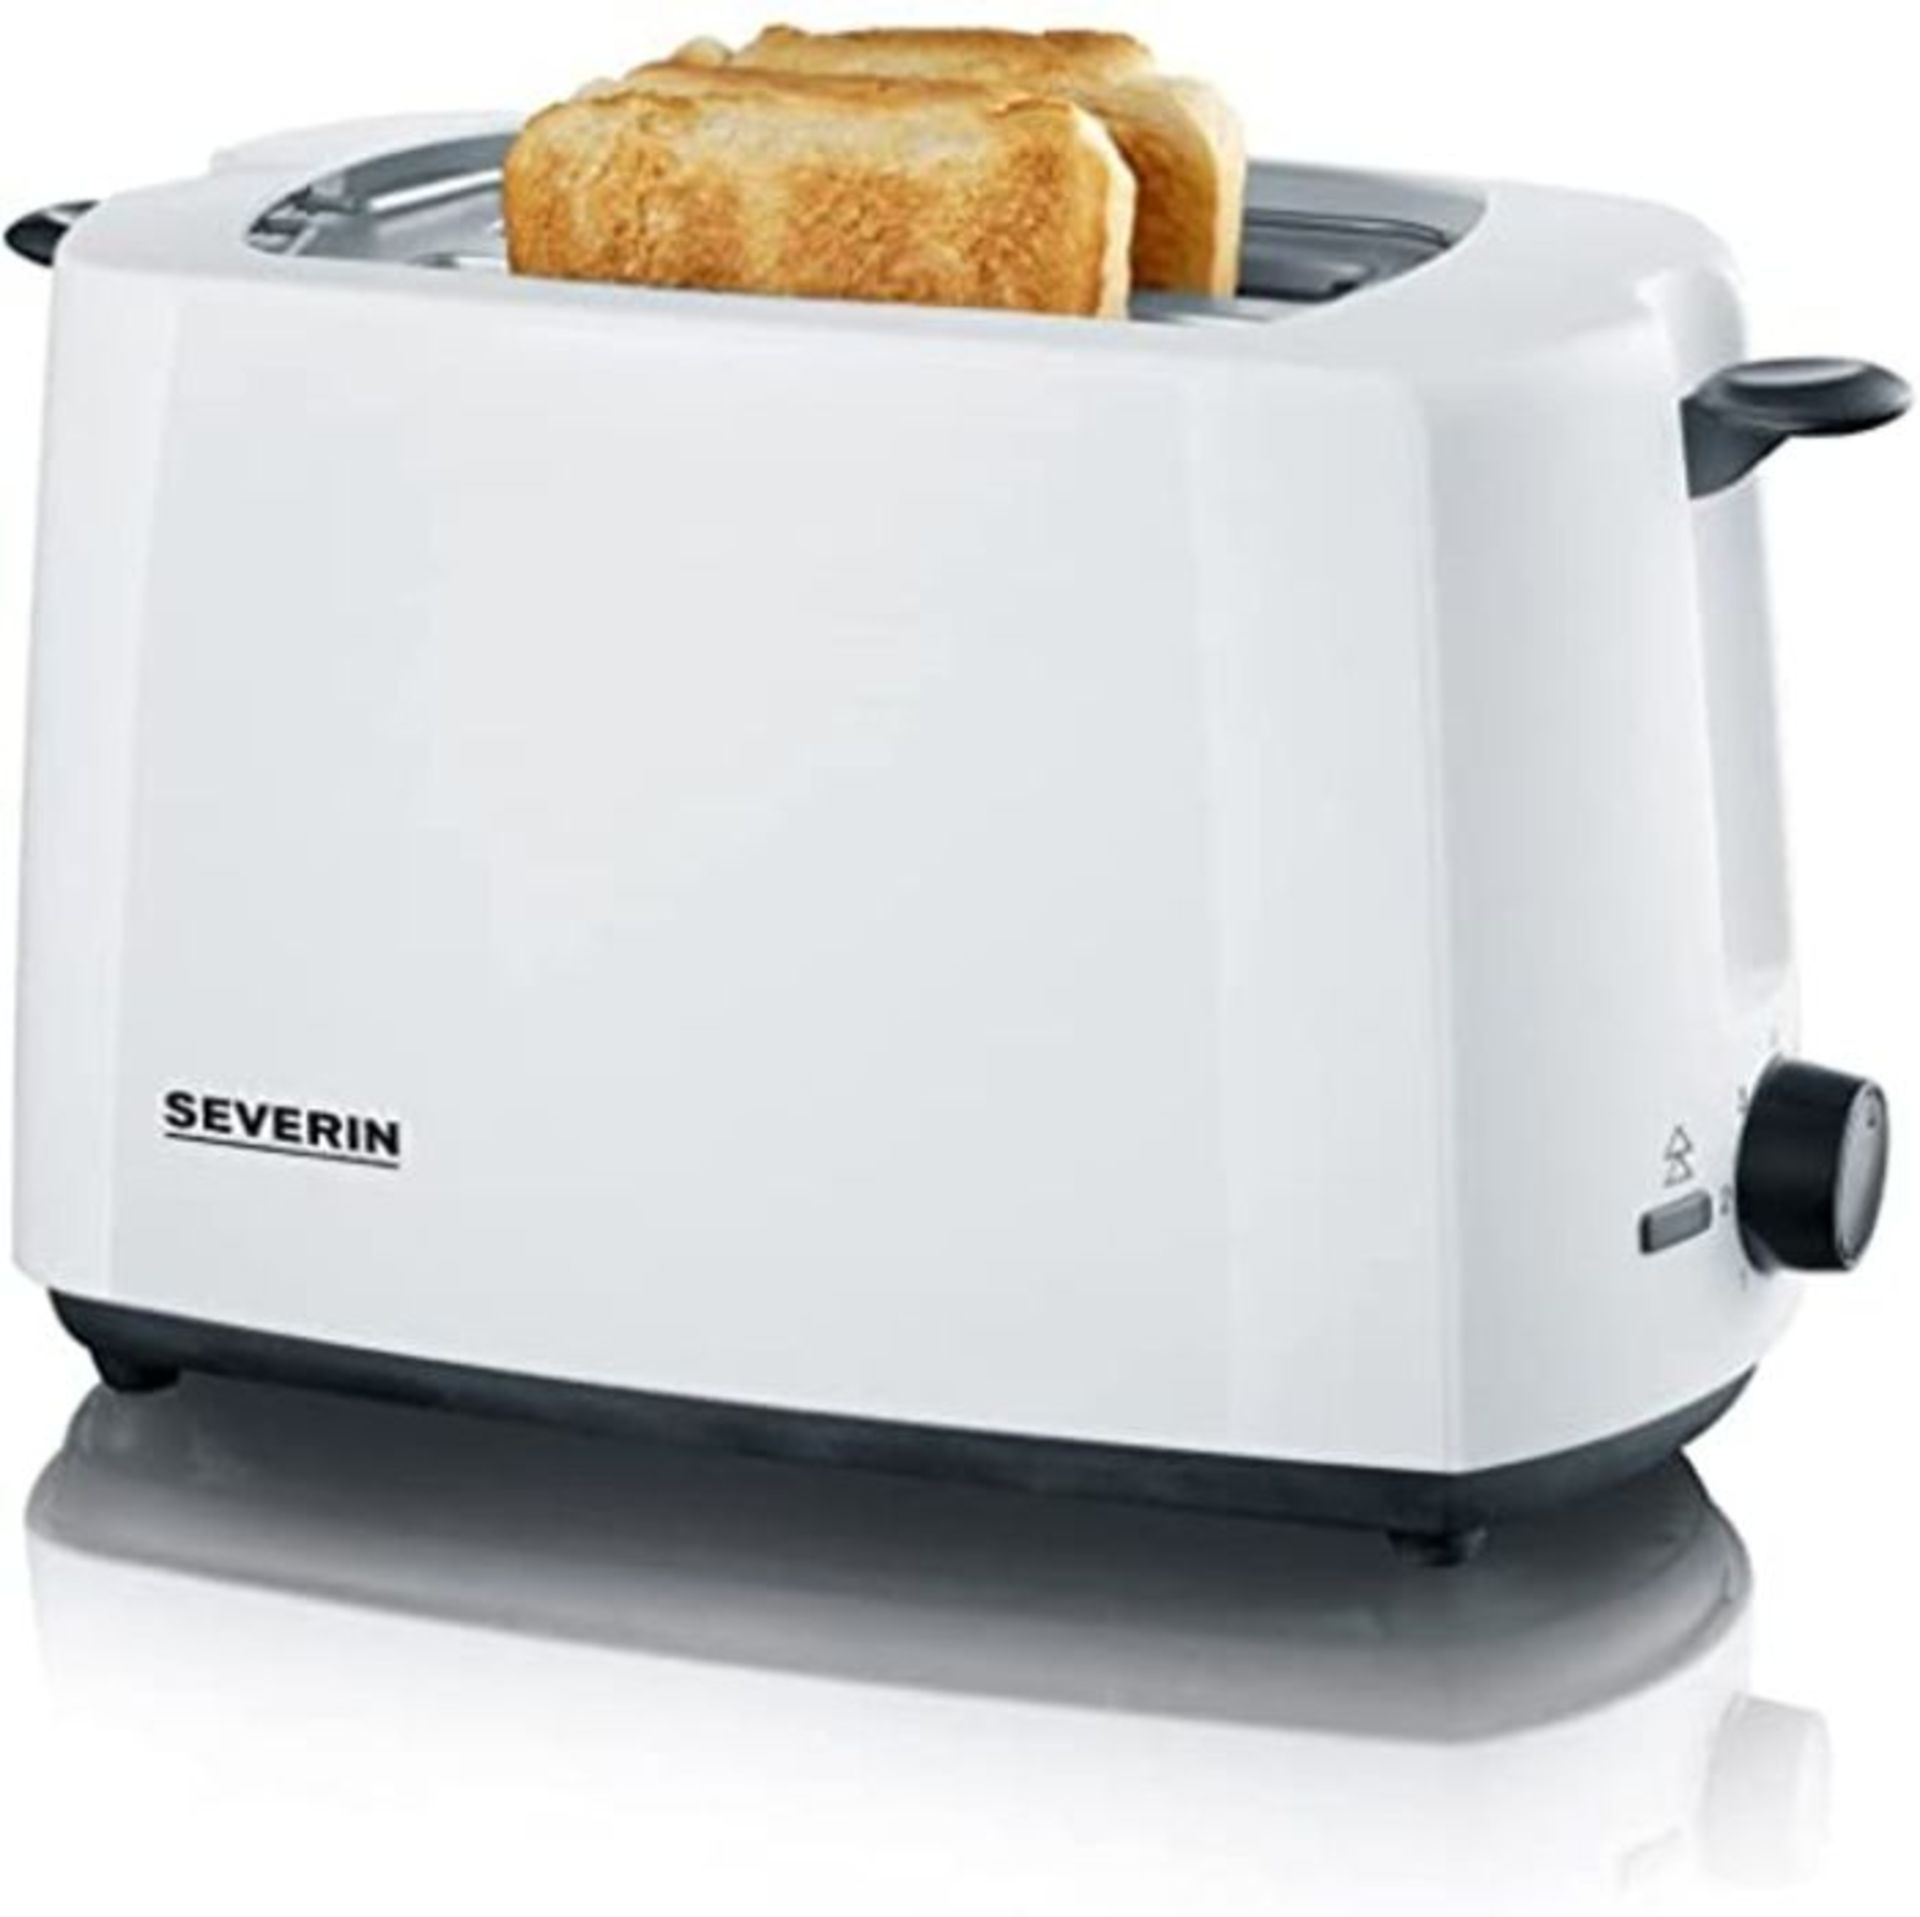 Severin Automatic toaster with 700 W of power 2286, white-black